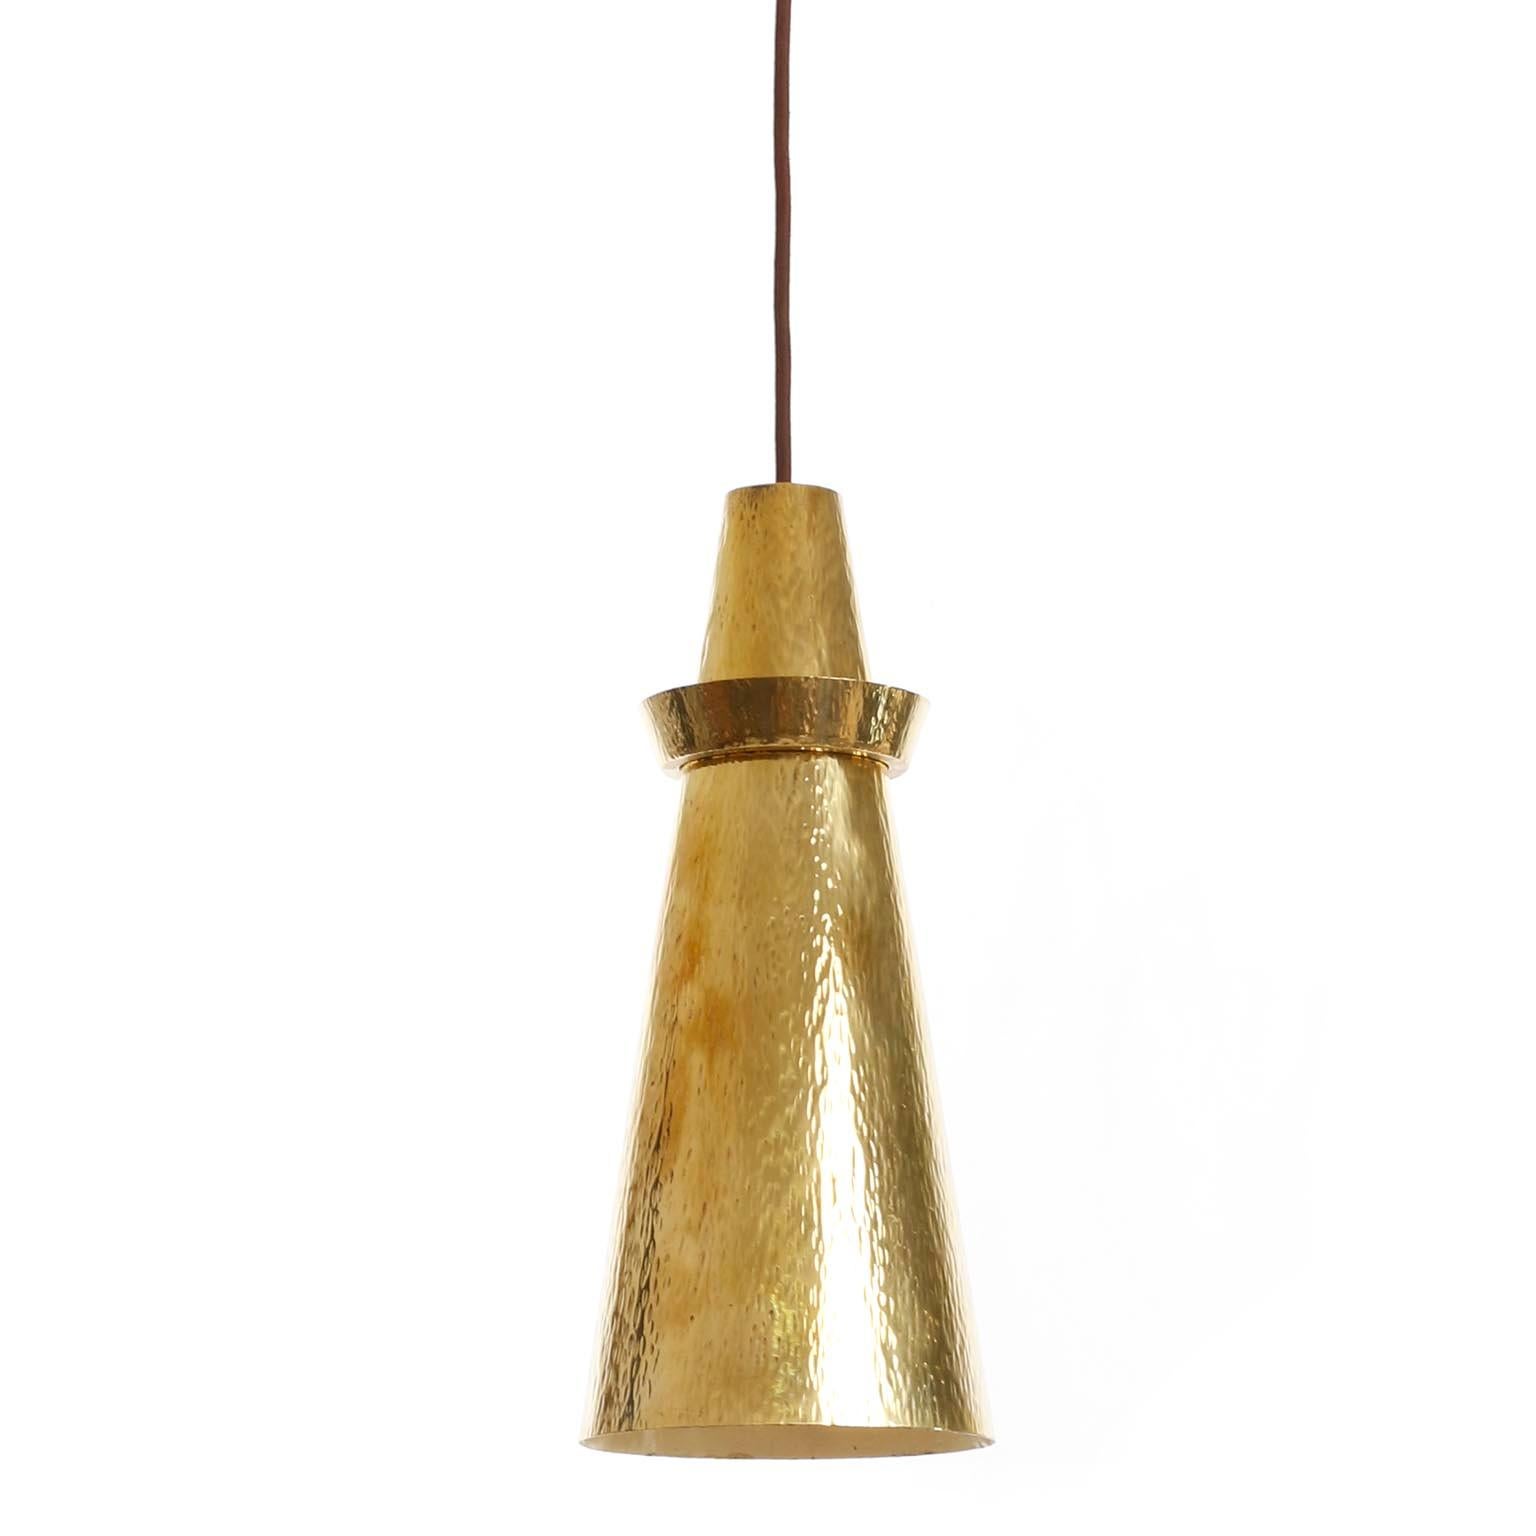 Mid-20th Century Pair of Mid-Century Modern Pendant Lights, Hammered Polished Brass, 1960s For Sale